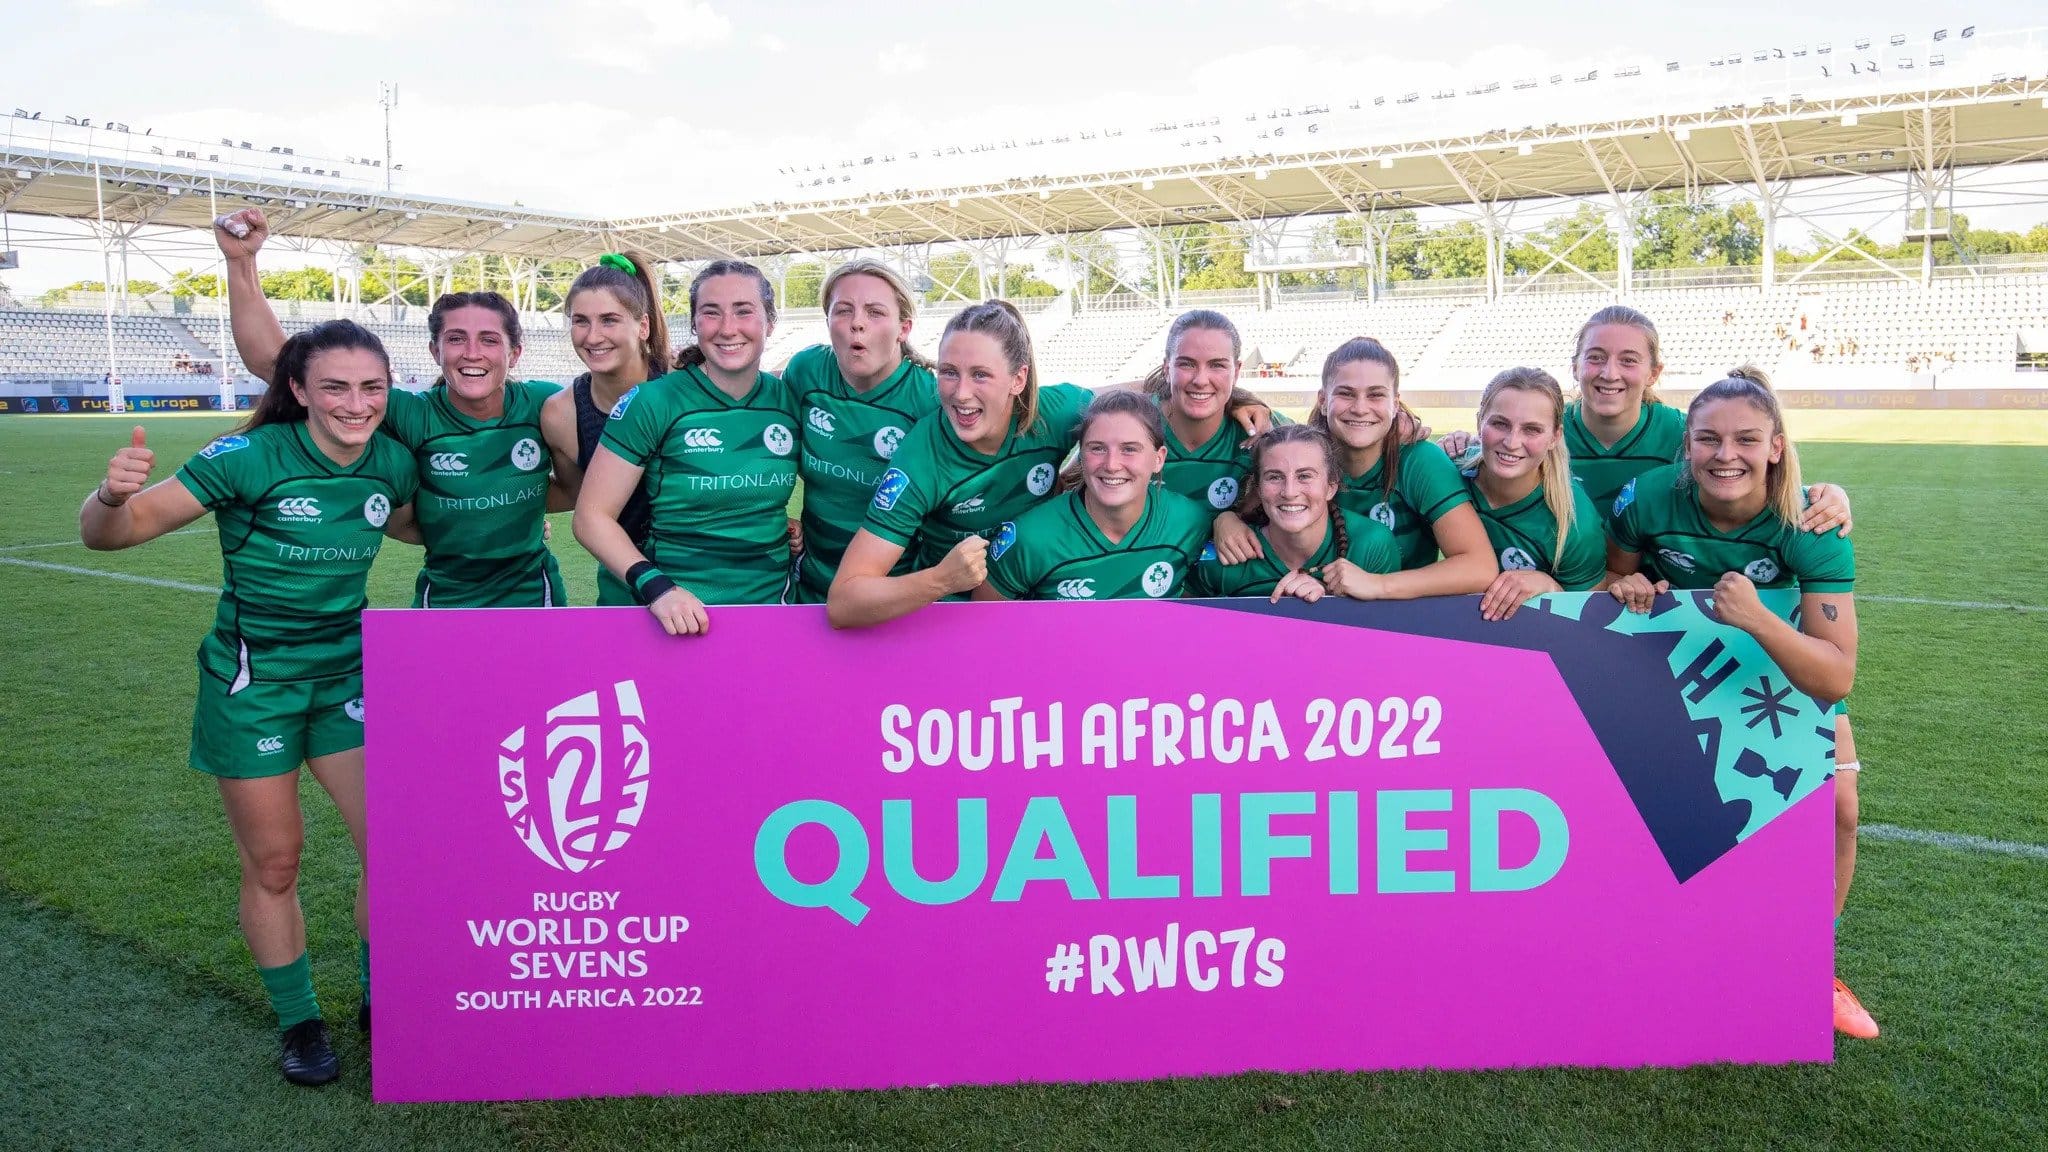 Full rugby world cup sevens 2022 line-up confirmed